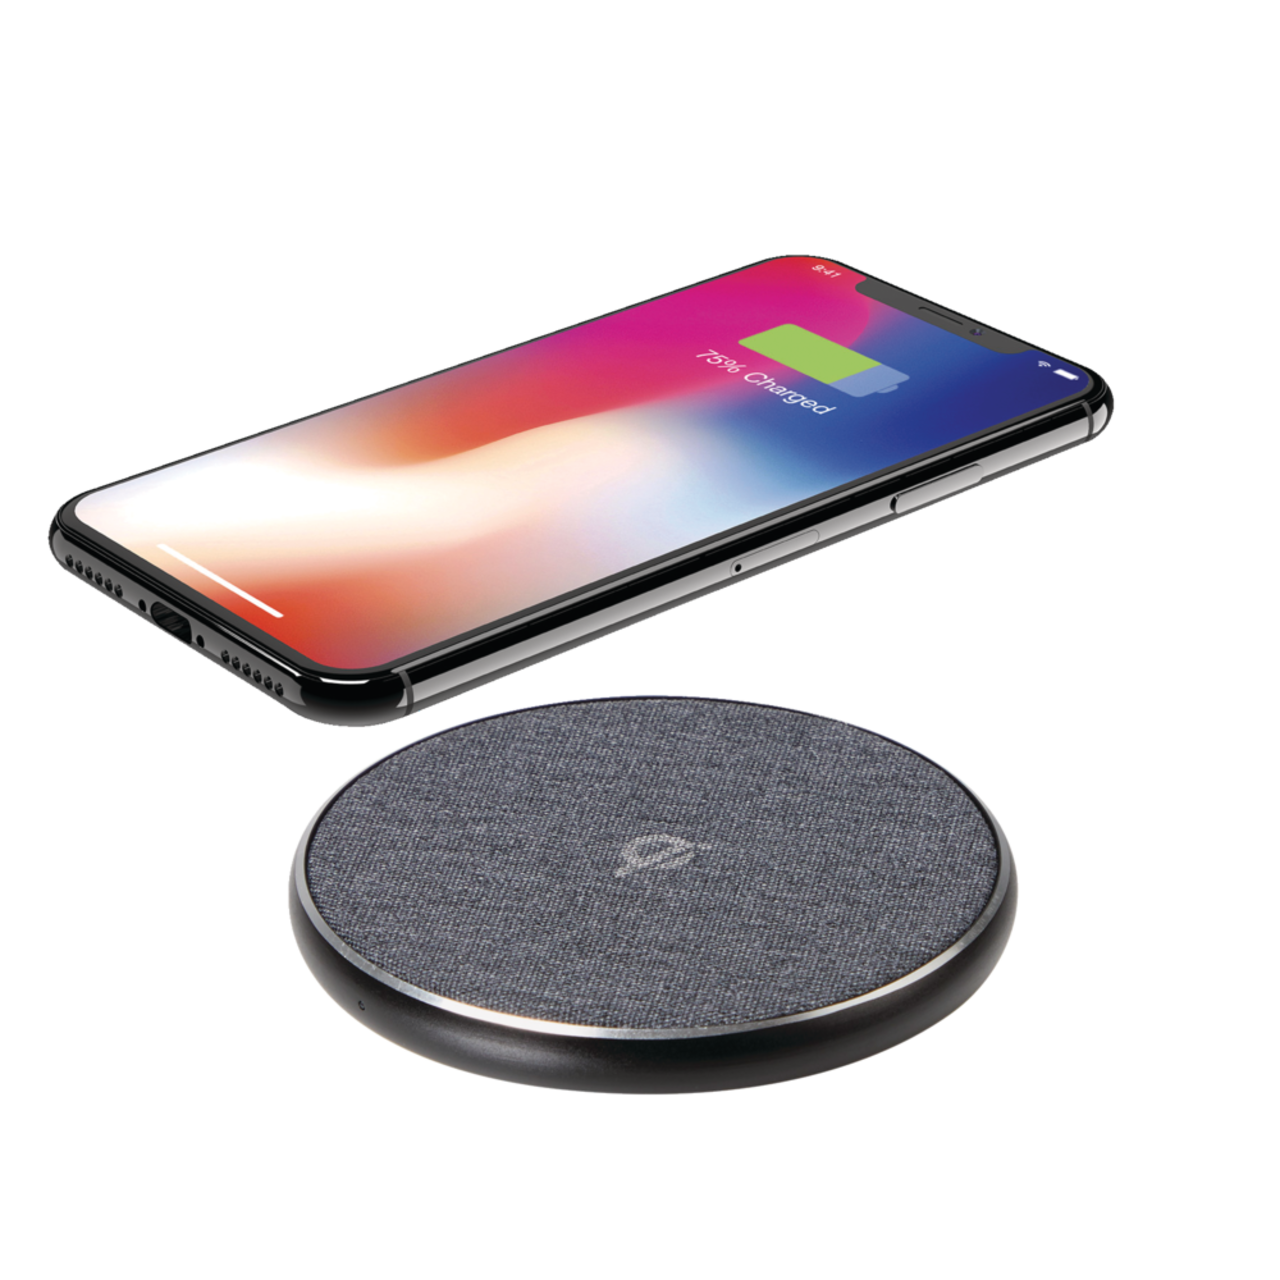 Bluehive Fabric Wierless Charging Pad, Compatible with Qi-Enabled Devices,  Black, 2-pk